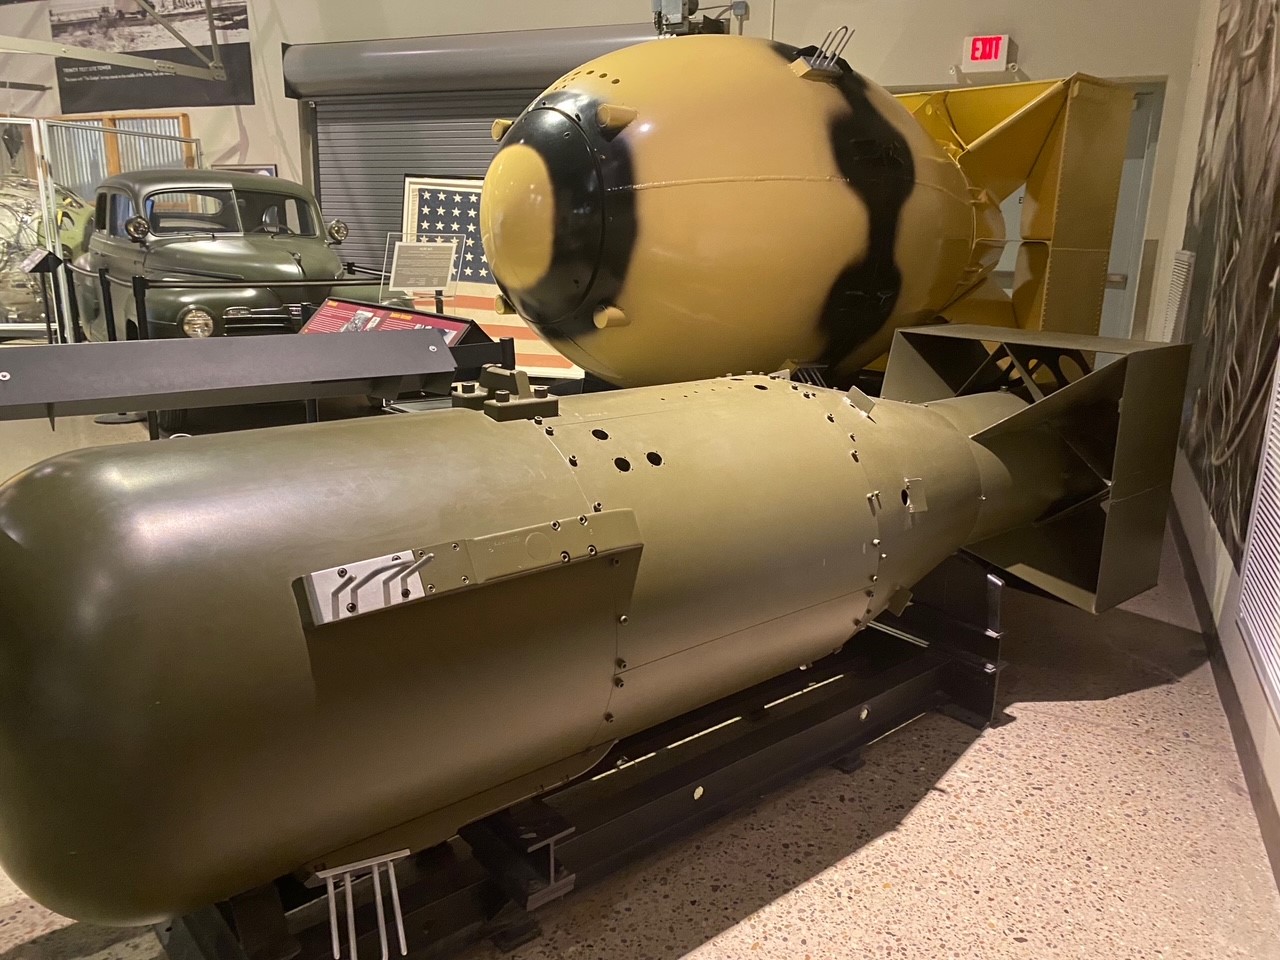 Replicas of “Little Boy” dropped on Hiroshima and “Fat Boy” (yellow) dropped on Nagasaki